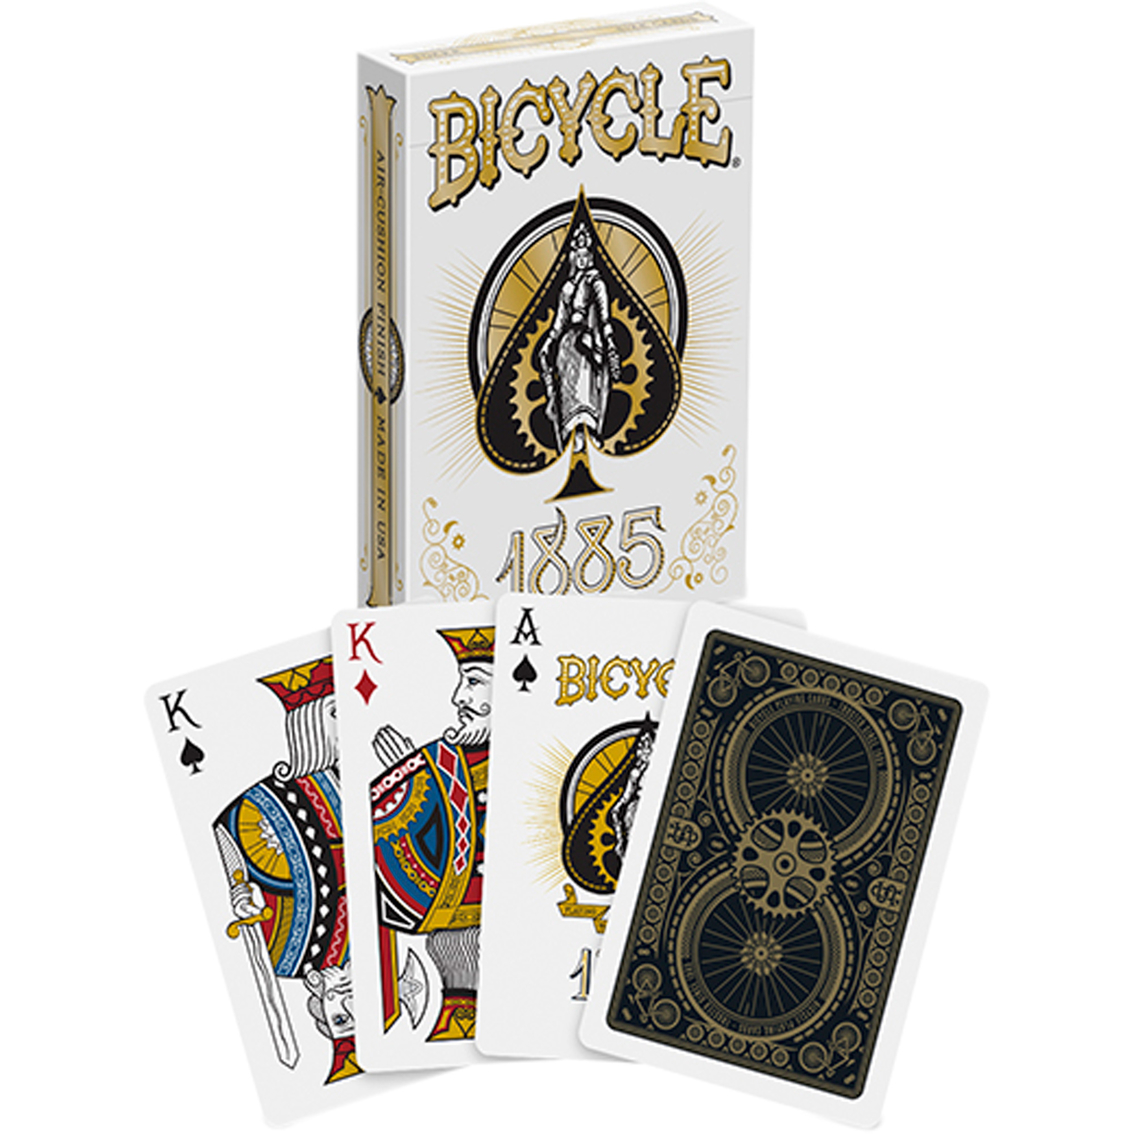 Bicycle 1885 Playing Cards - Image 2 of 6